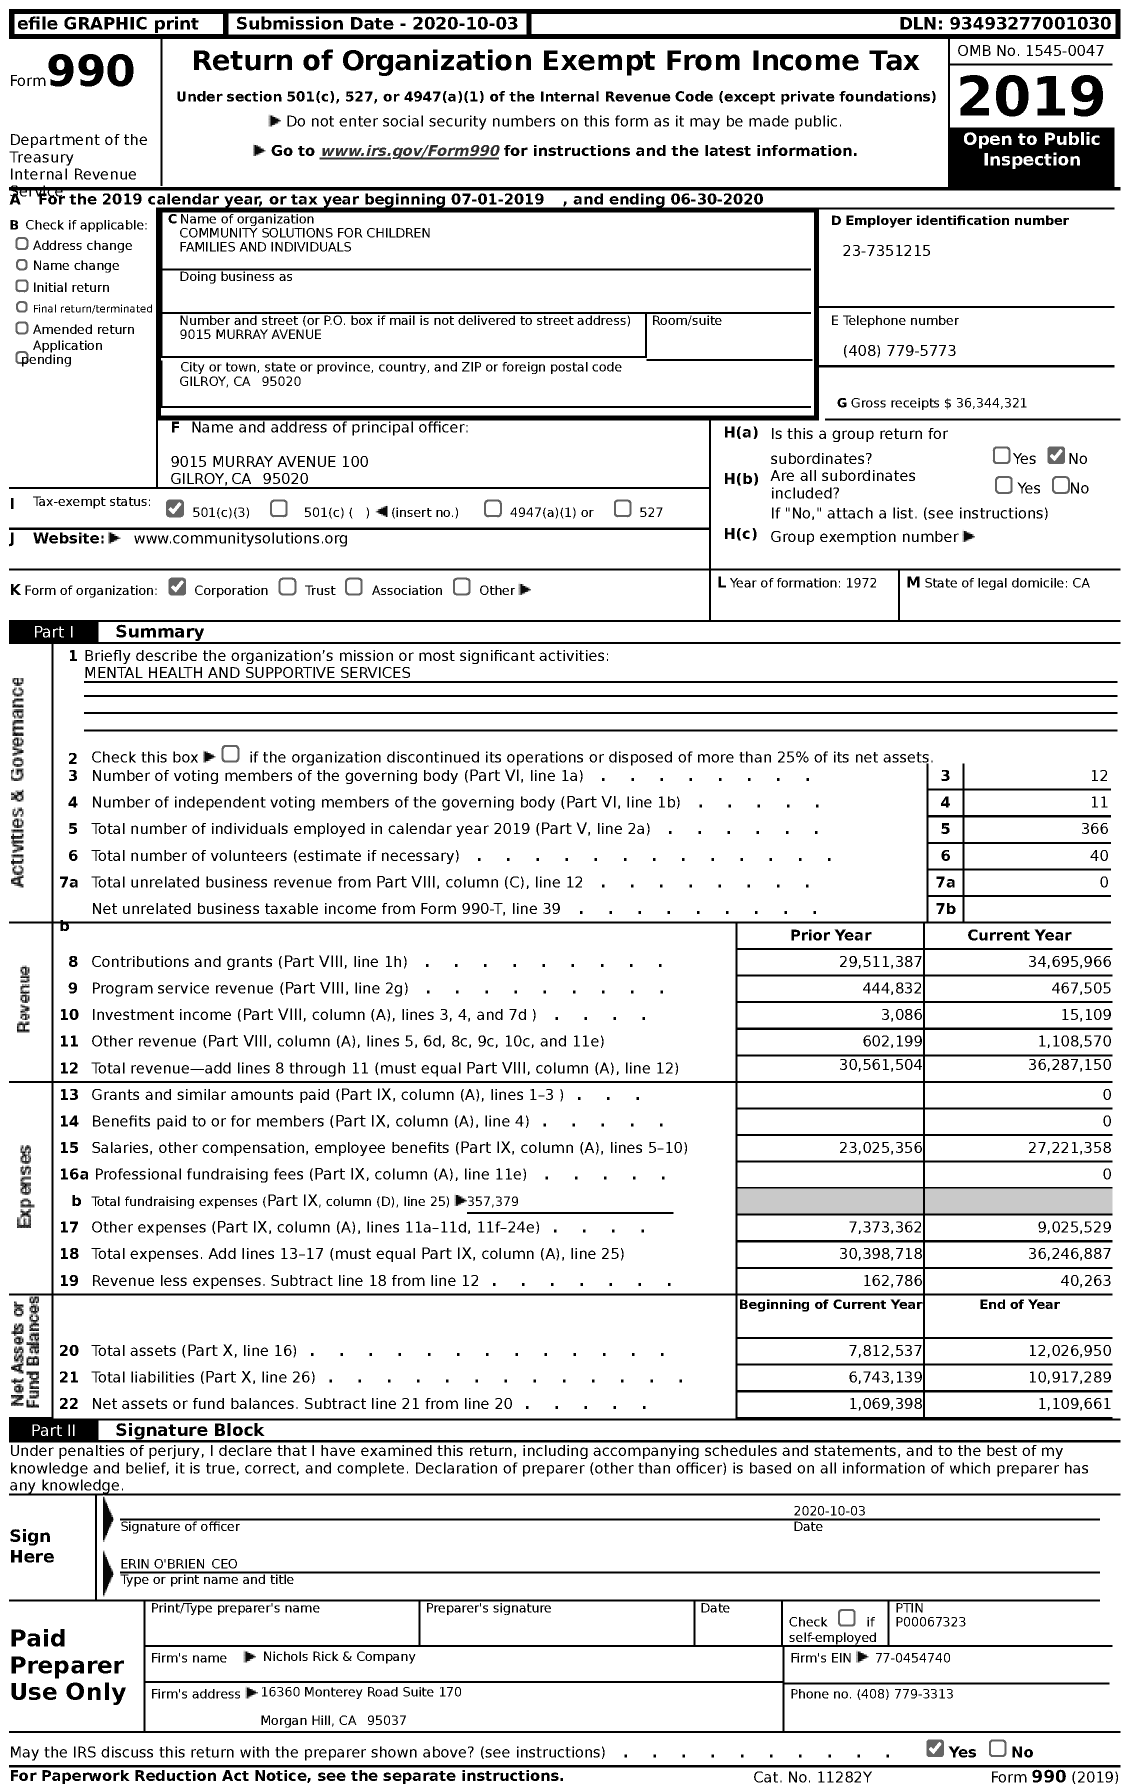 Image of first page of 2019 Form 990 for Community Solutions for Children Families and Individuals